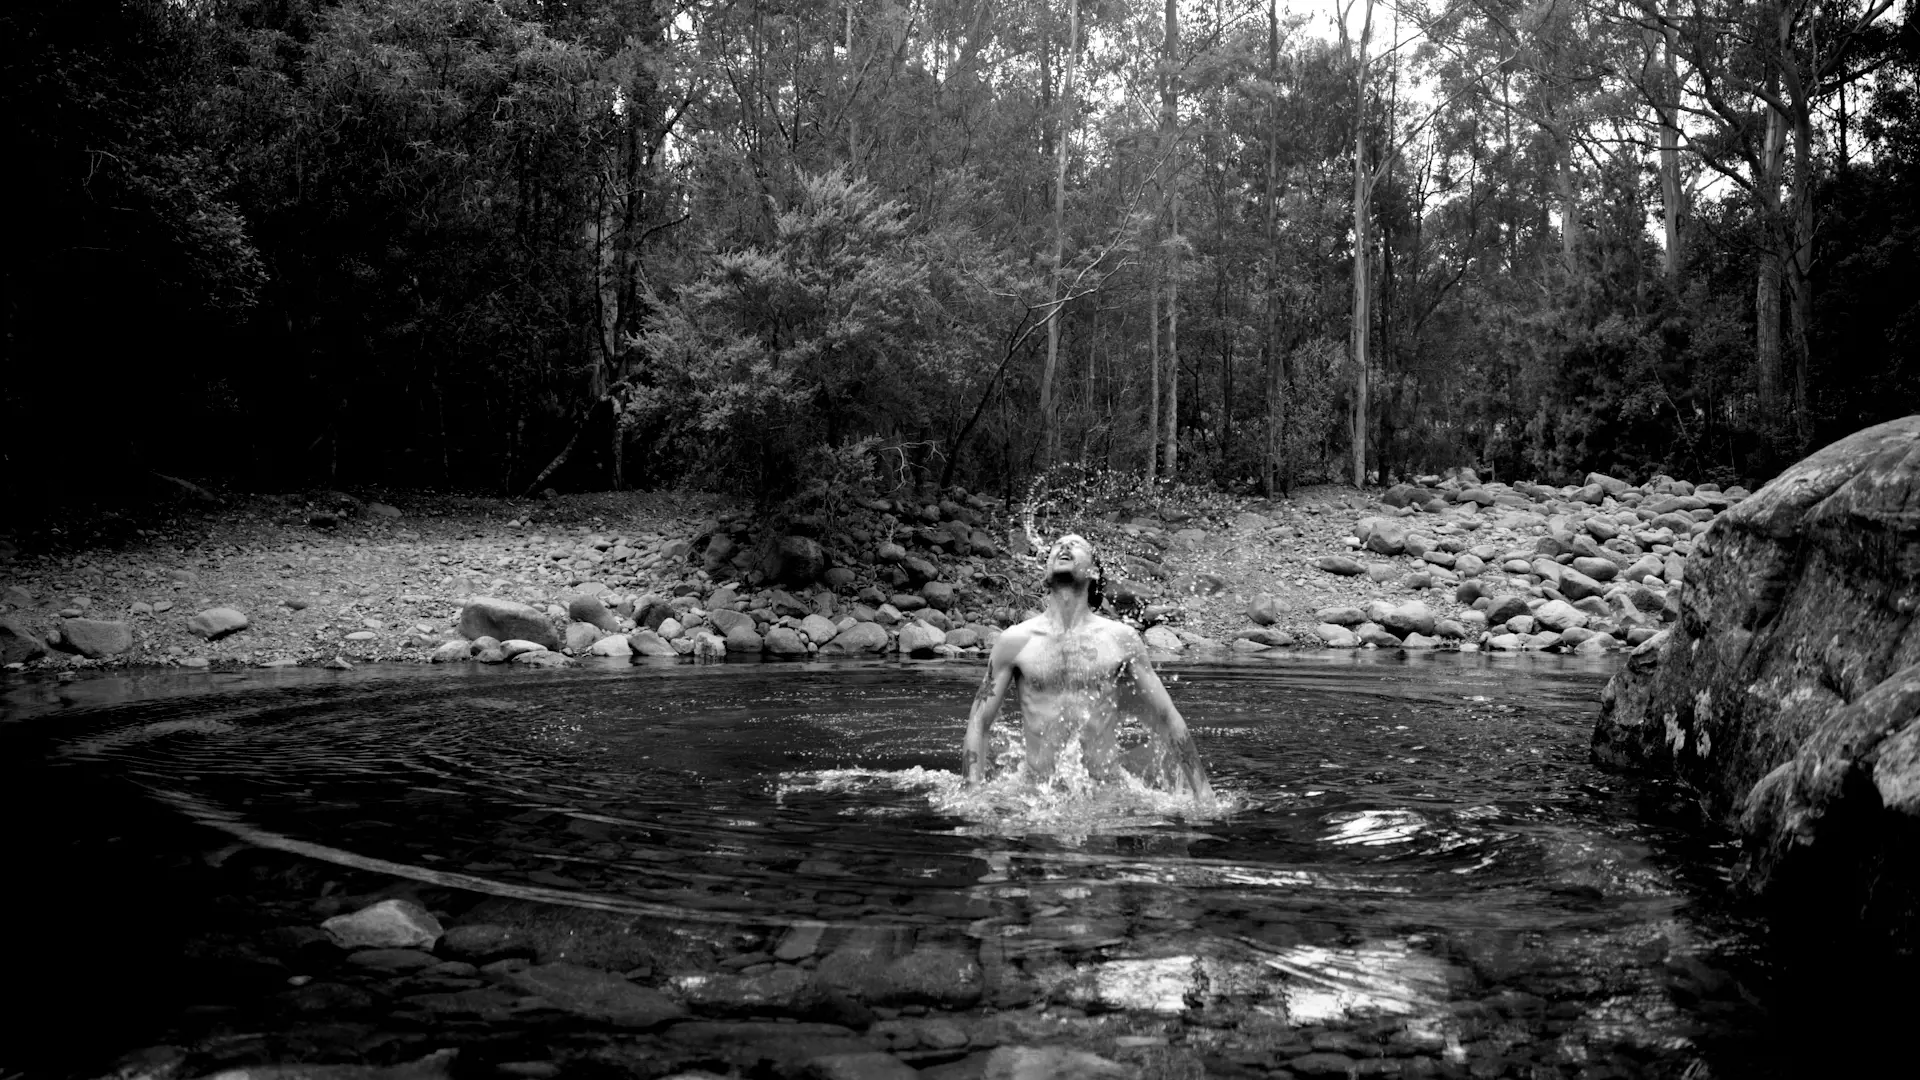 A man jumps up from beneath the surface of a small, rocky pond situated within a forest, splashing water.